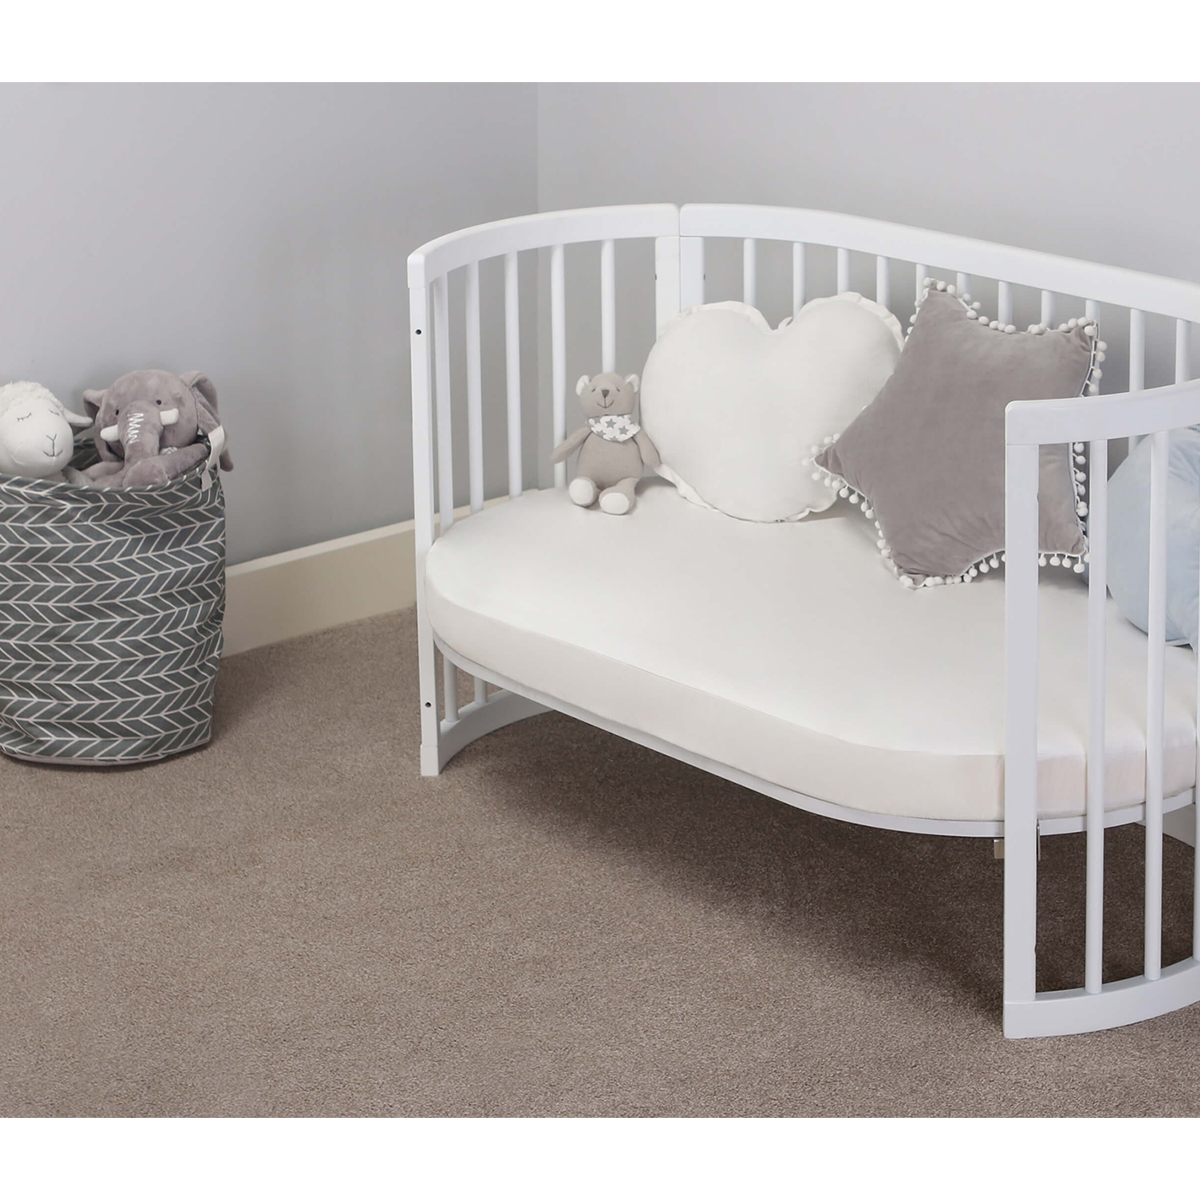 Boori Oasis Oval 10 in 1 Convertible Cot - White-6.jpg